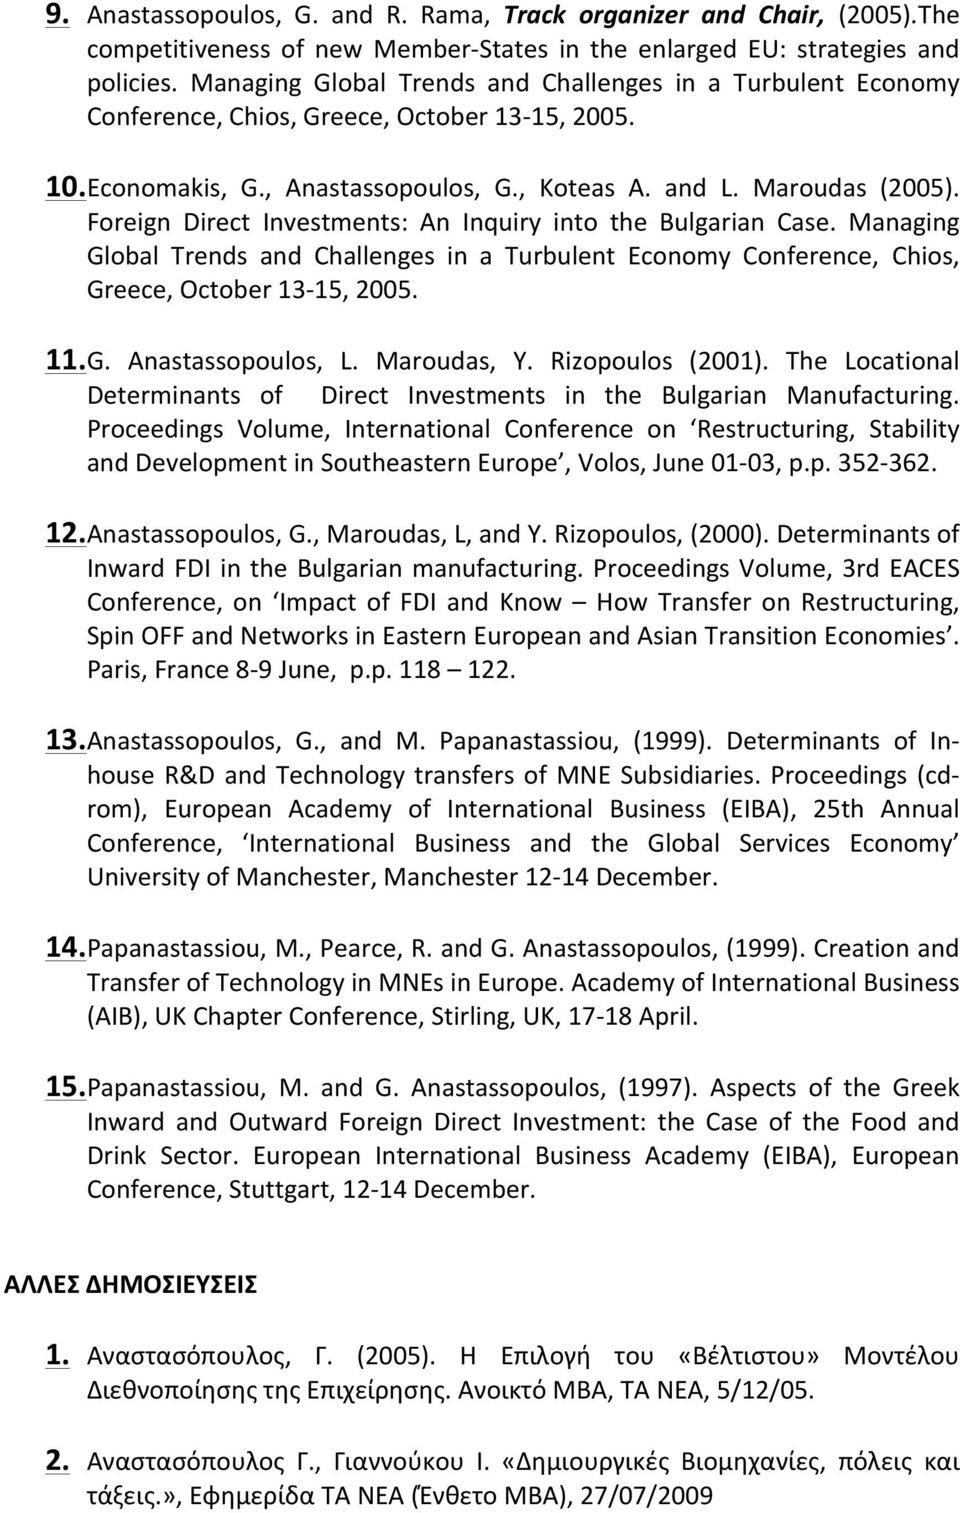 Foreign Direct Investments: An Inquiry into the Bulgarian Case. Managing Global Trends and Challenges in a Turbulent Economy Conference, Chios, Greece, October 13-15, 2005. 11. G. Anastassopoulos, L.